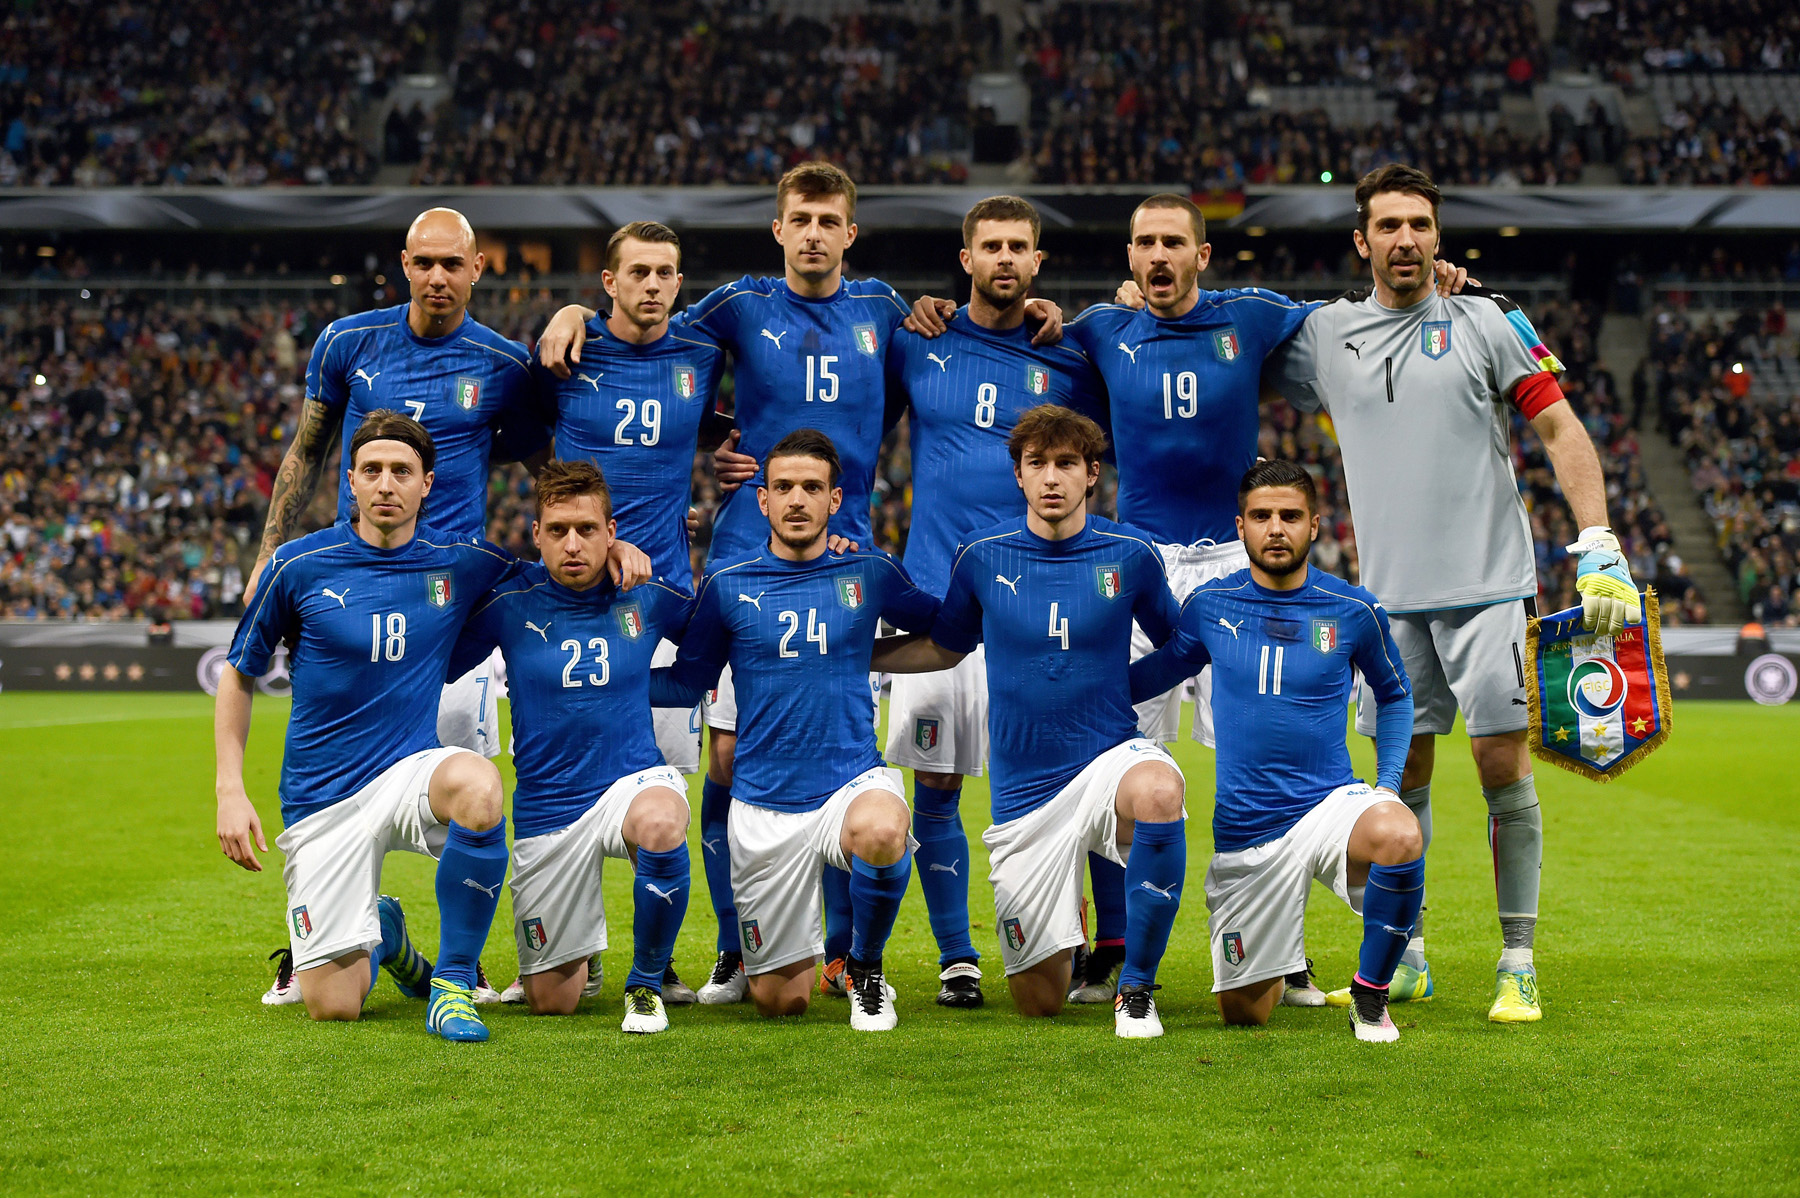 Italy´s players (From L, back row) forward Simone Zaza, defender Federico Bernarderschi, defender Francesco Acerbi, defender Thiago Motta, defender Leonardo Bonucci and goalkeeper Gianluigi Buffon (From L, front row) midfielder Riccardo Montolivo, midfielder Emanuele Giaccherini, midfielder Alessandro Florenzi, defender Matteo Darmian and forward Lorenzo Insigne pose for team picture prior to the friendly football match Germany vs Italy in Munich, southern Germany on March 29, 2016. / AFP / PATRIK STOLLARZ (Photo credit should read PATRIK STOLLARZ/AFP/Getty Images)